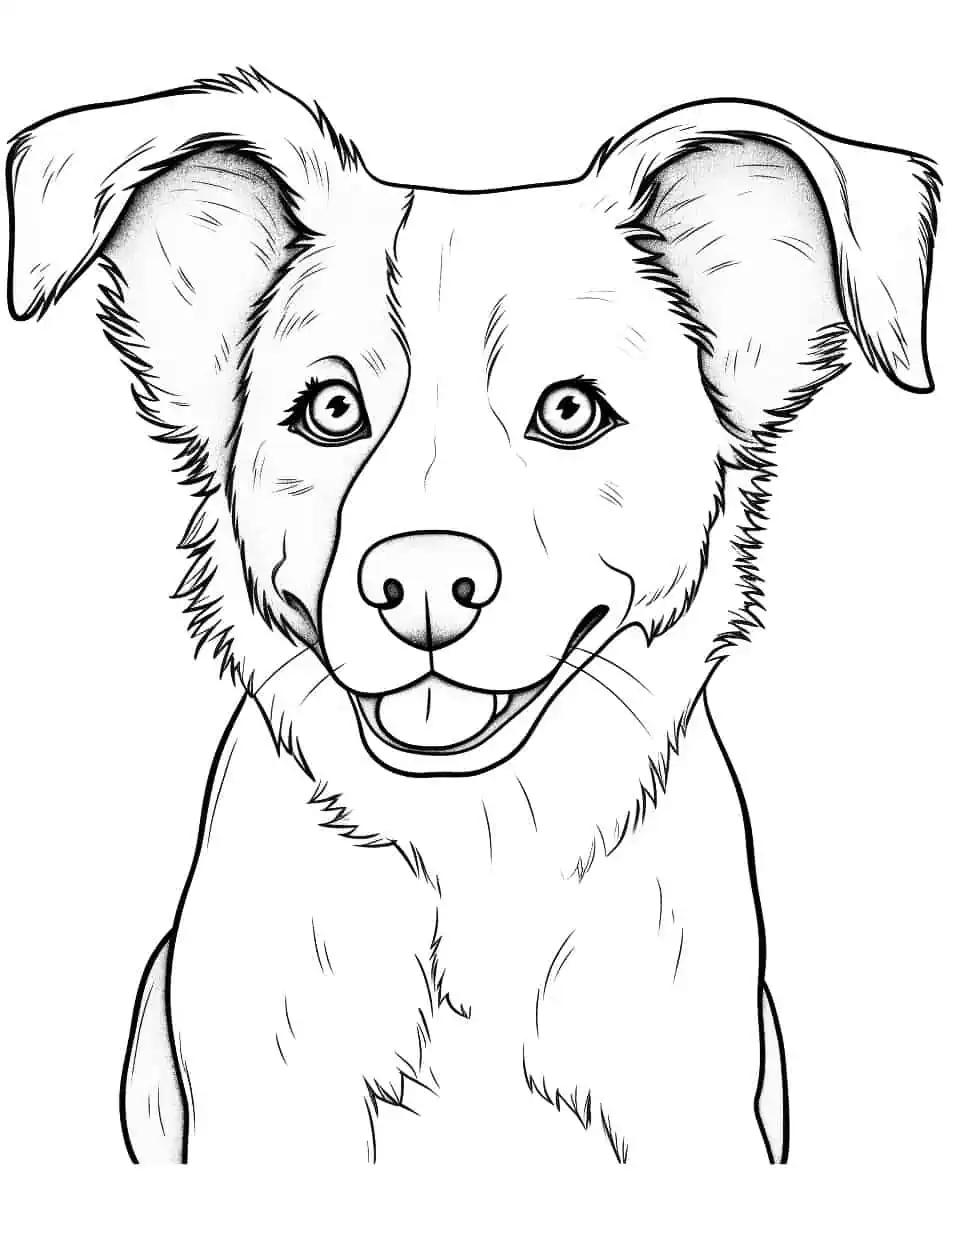 Full Page Border Collie Coloring Page - A full page, realistic portrait of a Border Collie.